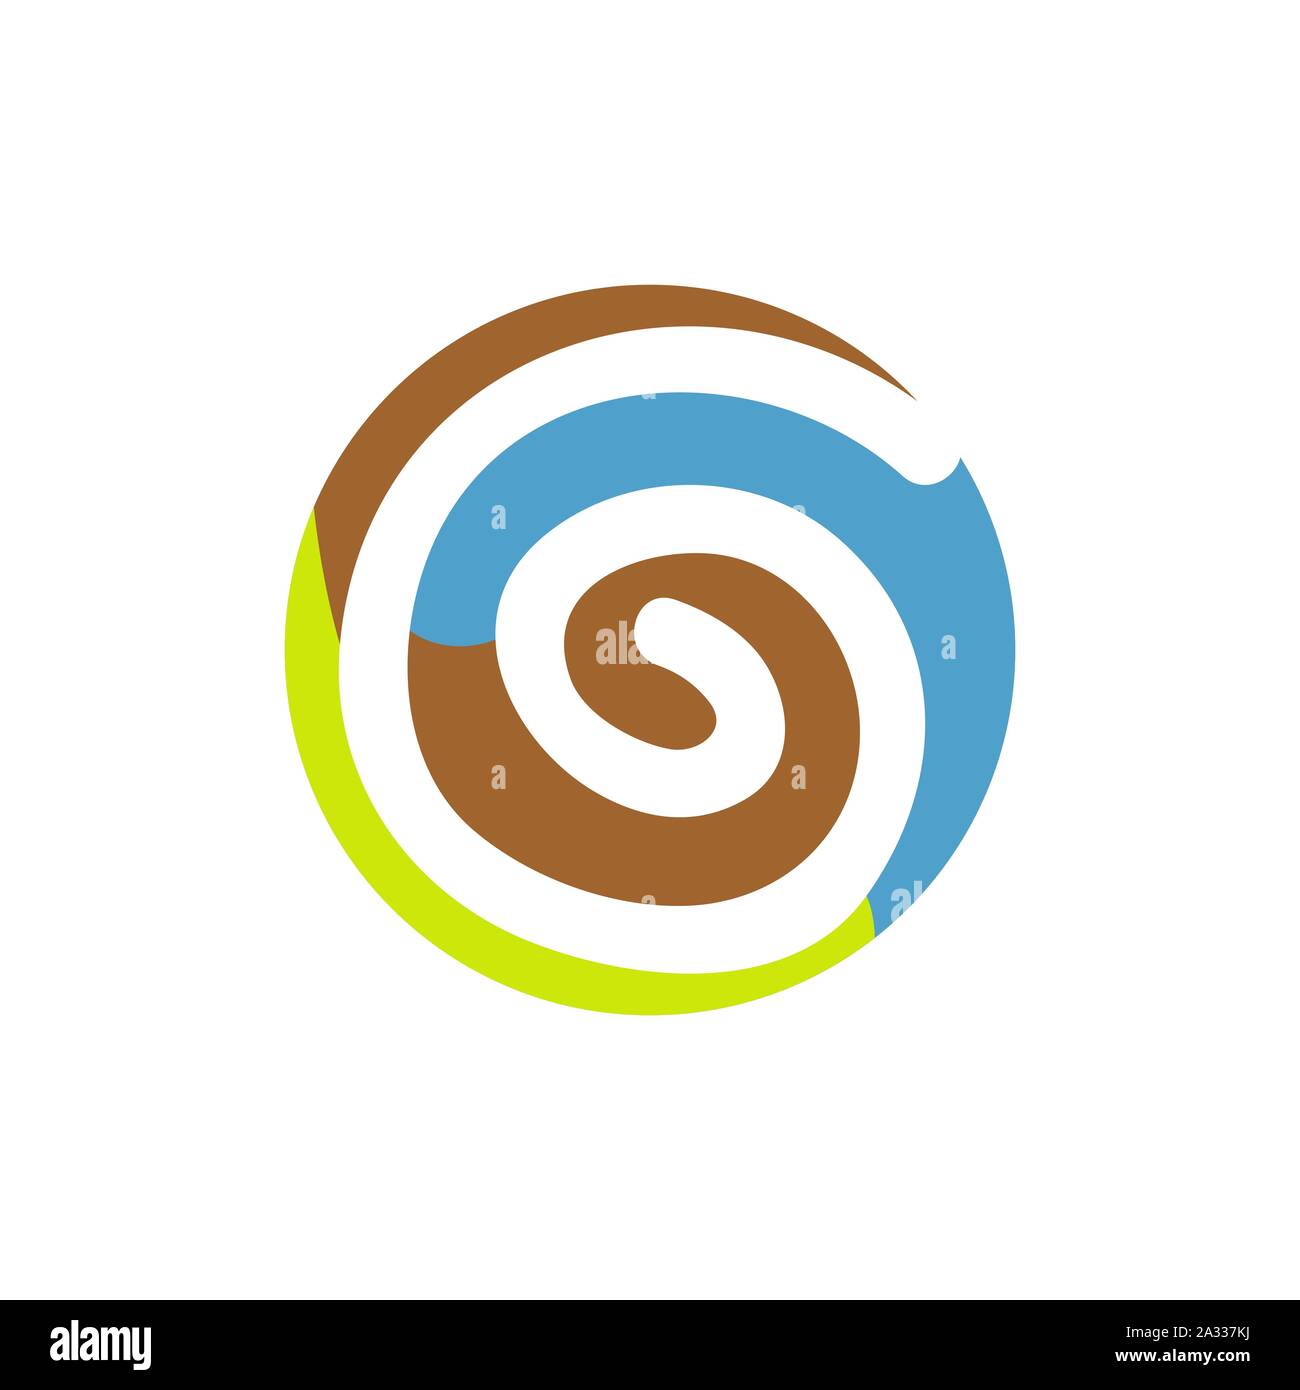 abstract swirl rotation circle logo design vector graphic element template Stock Vector